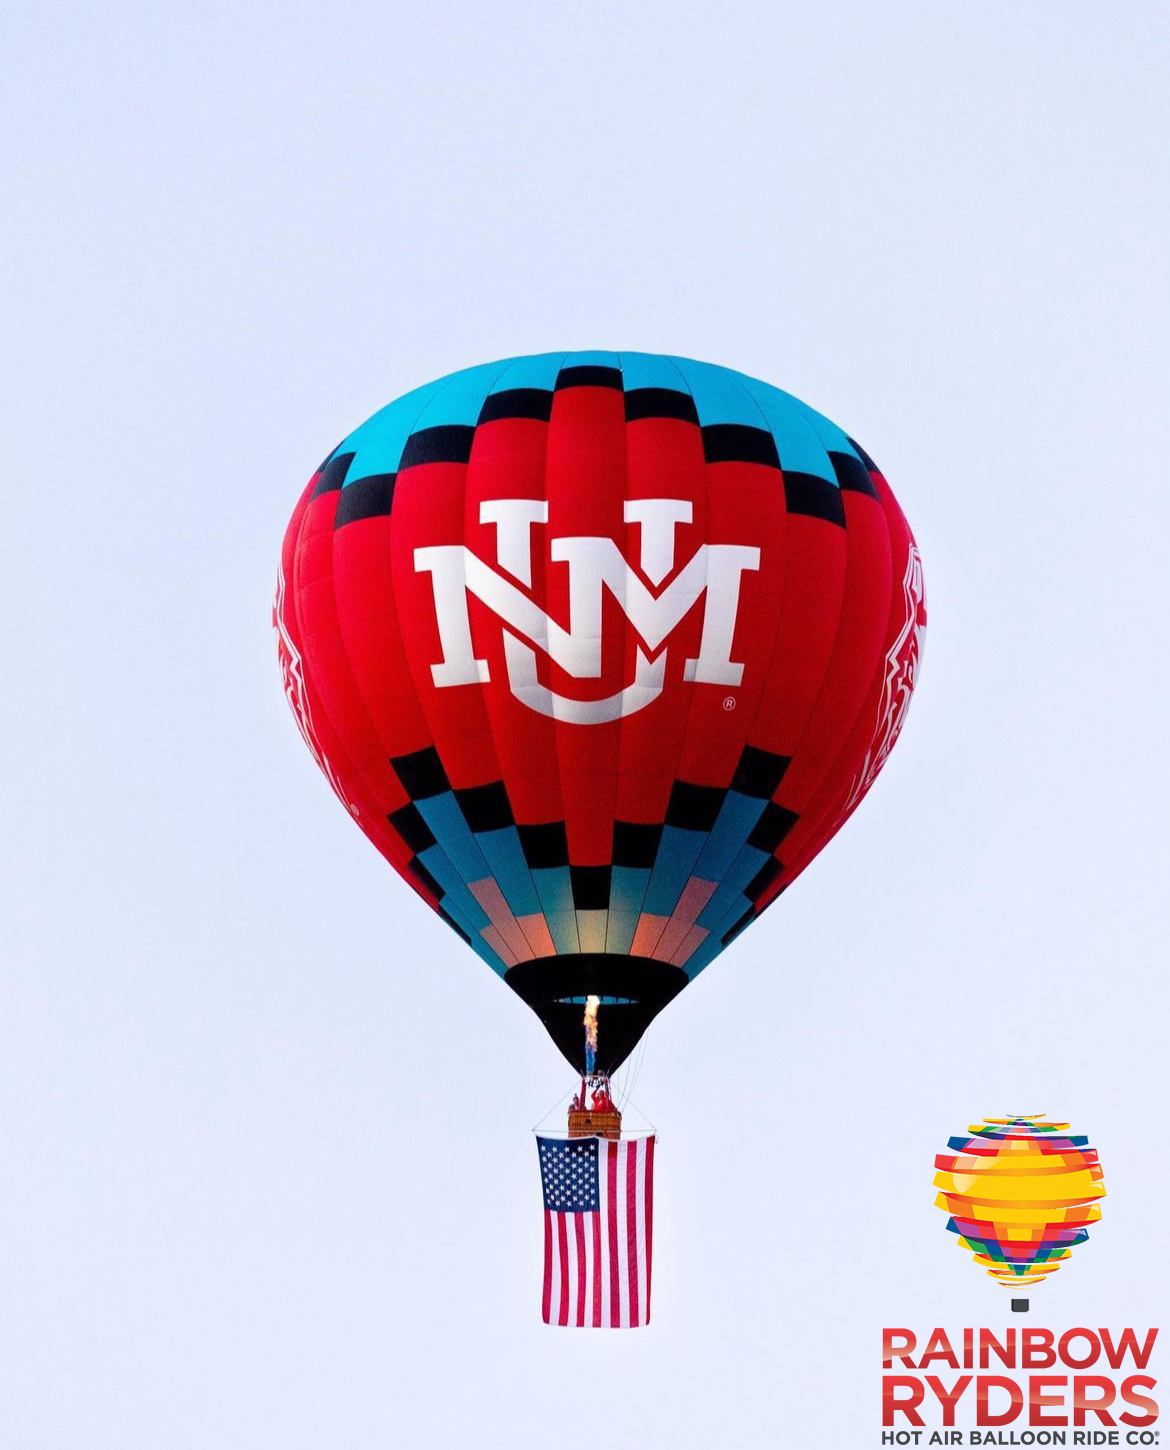 Cherry on Top, UNM branded hot air balloon, in flight with Rainbow Ryders Hot Air Balloon Ride Co. logo in corner.